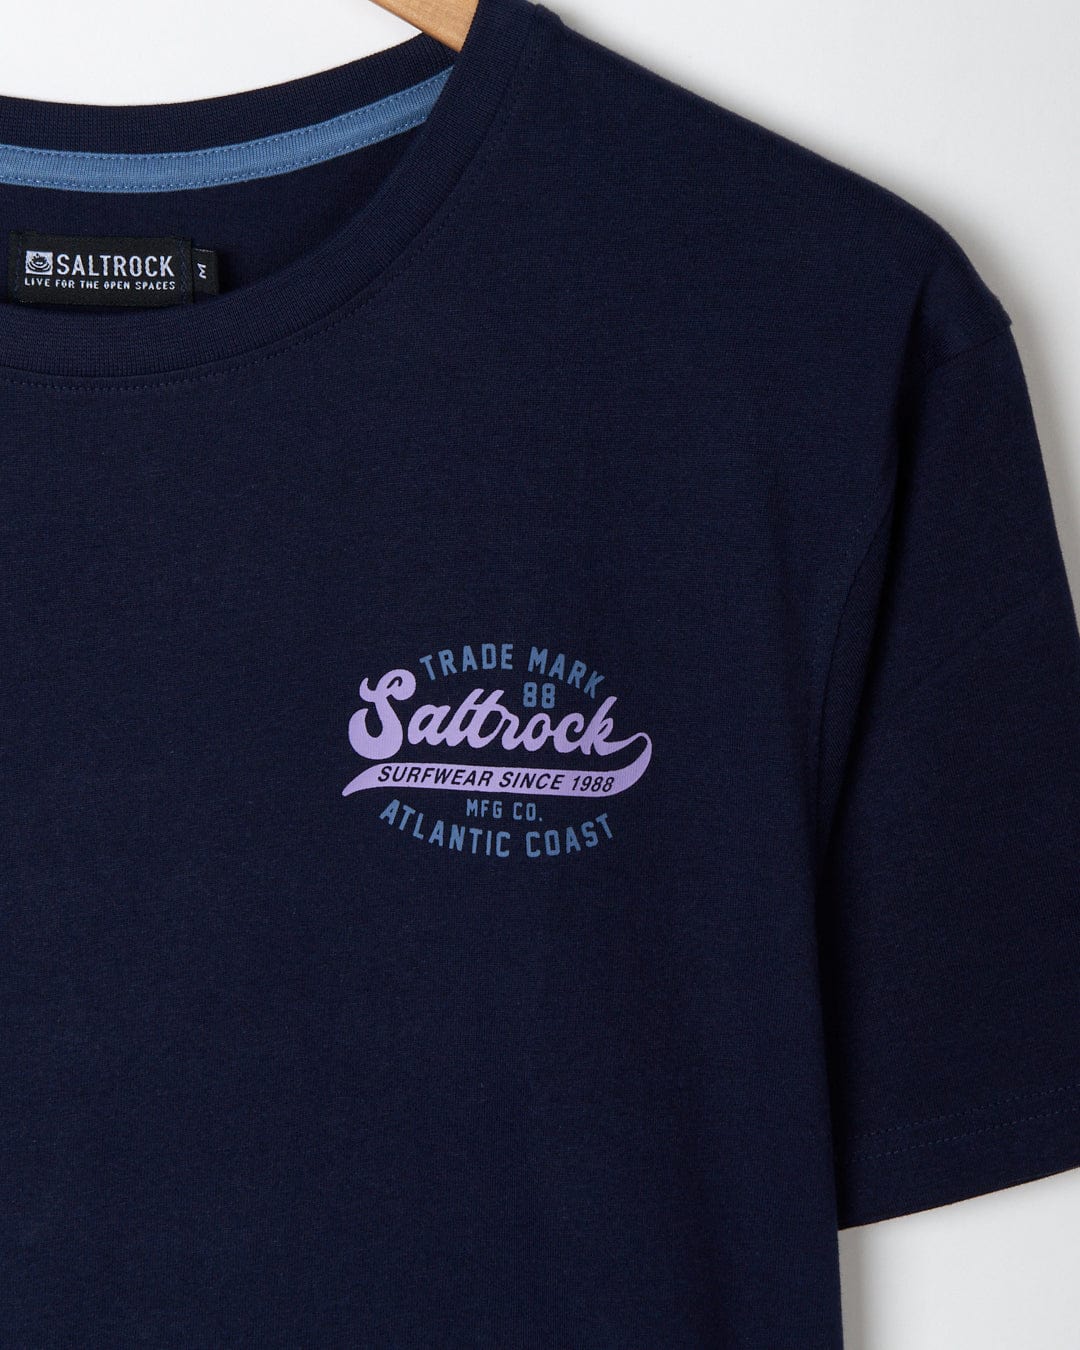 Close-up of a dark blue cotton Saltrock Home Run t-shirt with branding on the chest.